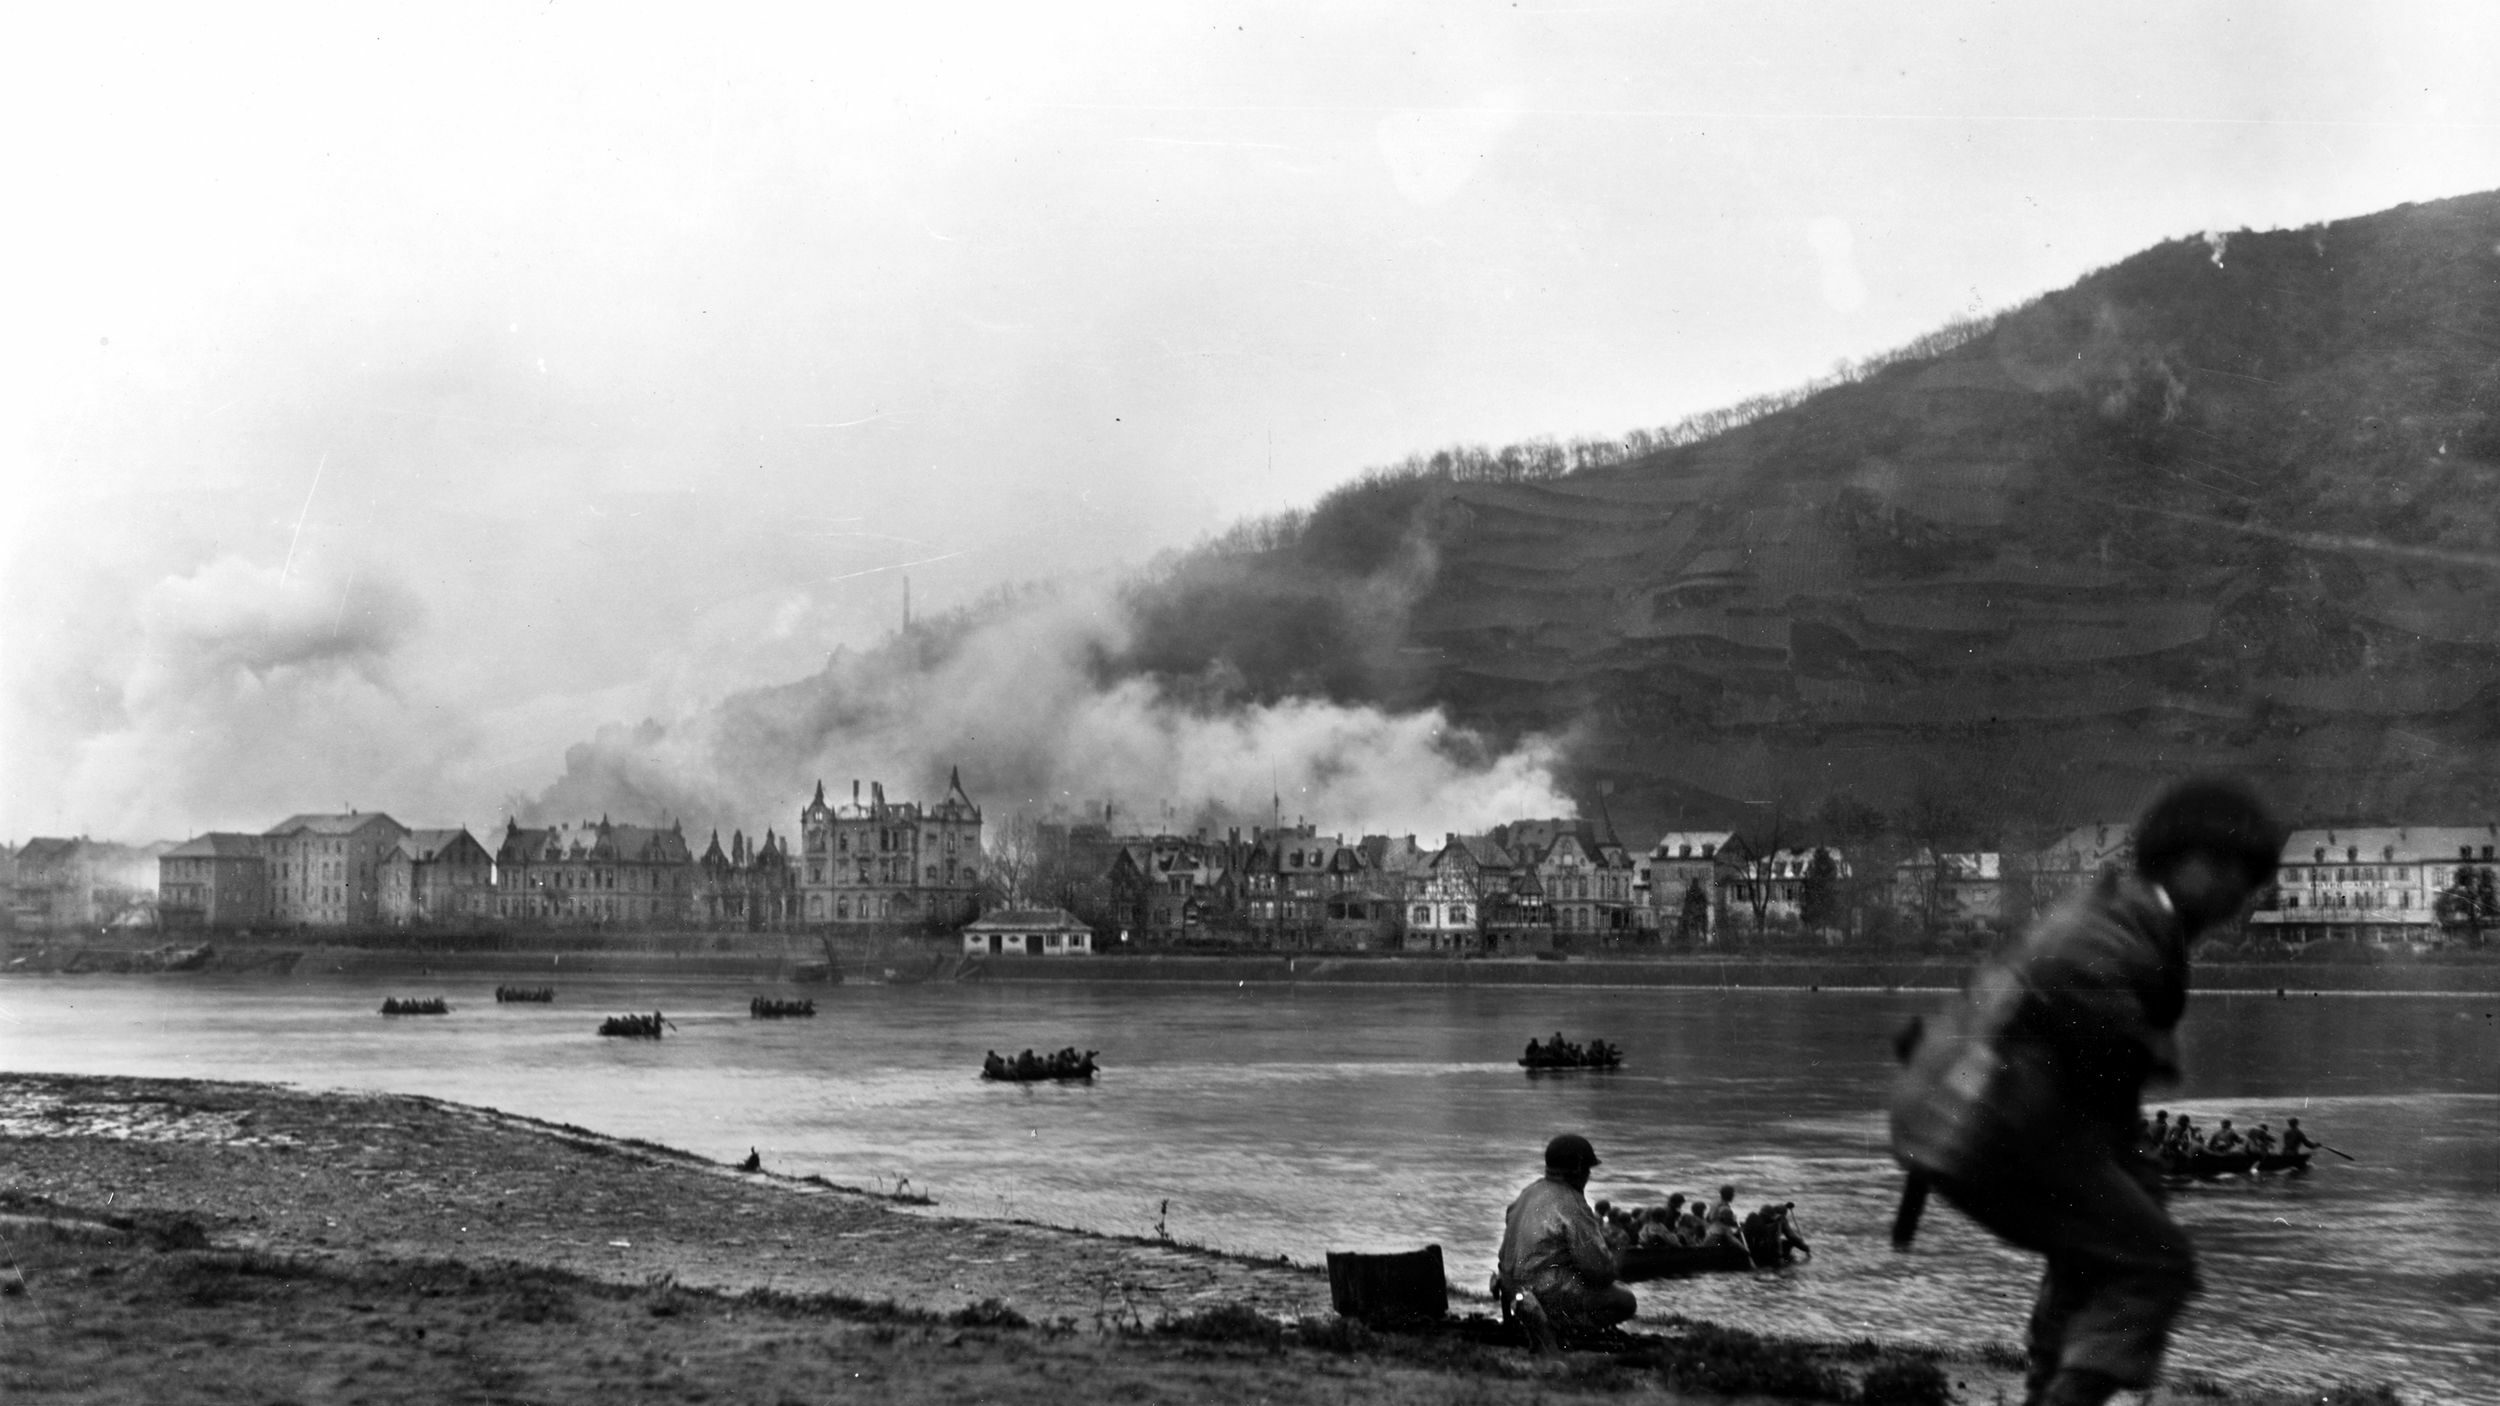 Assault boats carry Patton’s Third Army troops across the Rhine at St. Goar, Germany. Troops in foreground are on the alert for snipers.